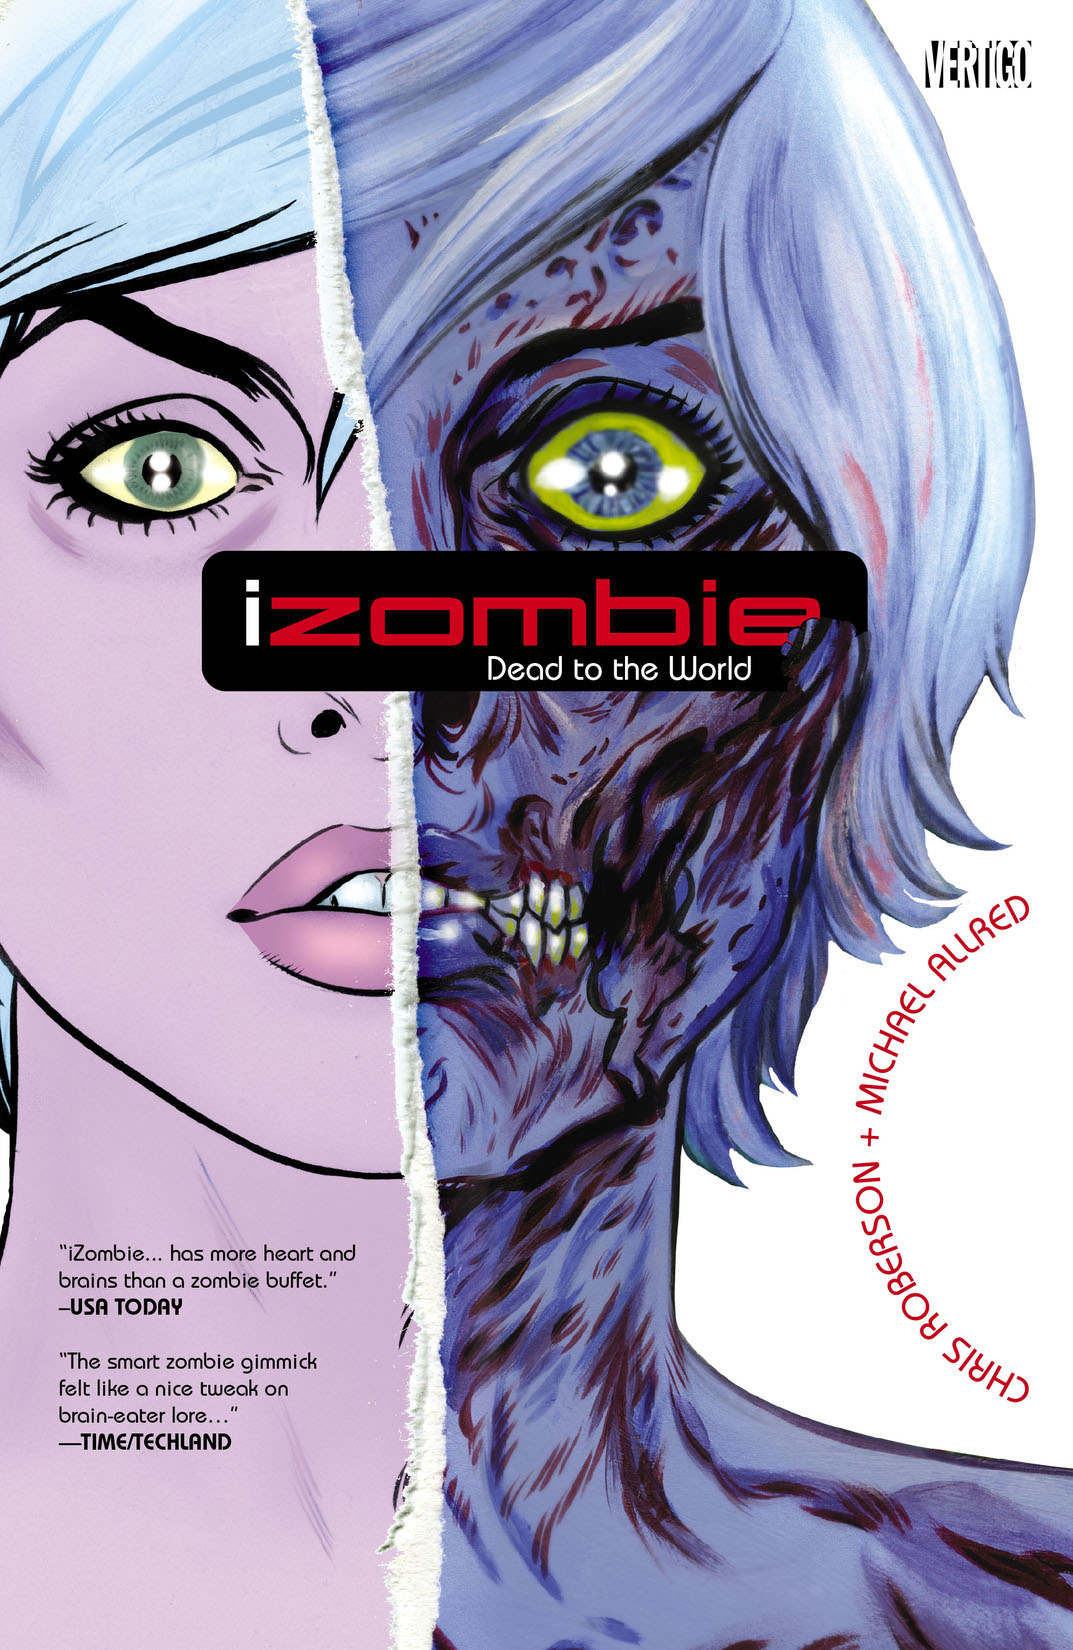 iZombie Vol. 1: Dead to the World preview images